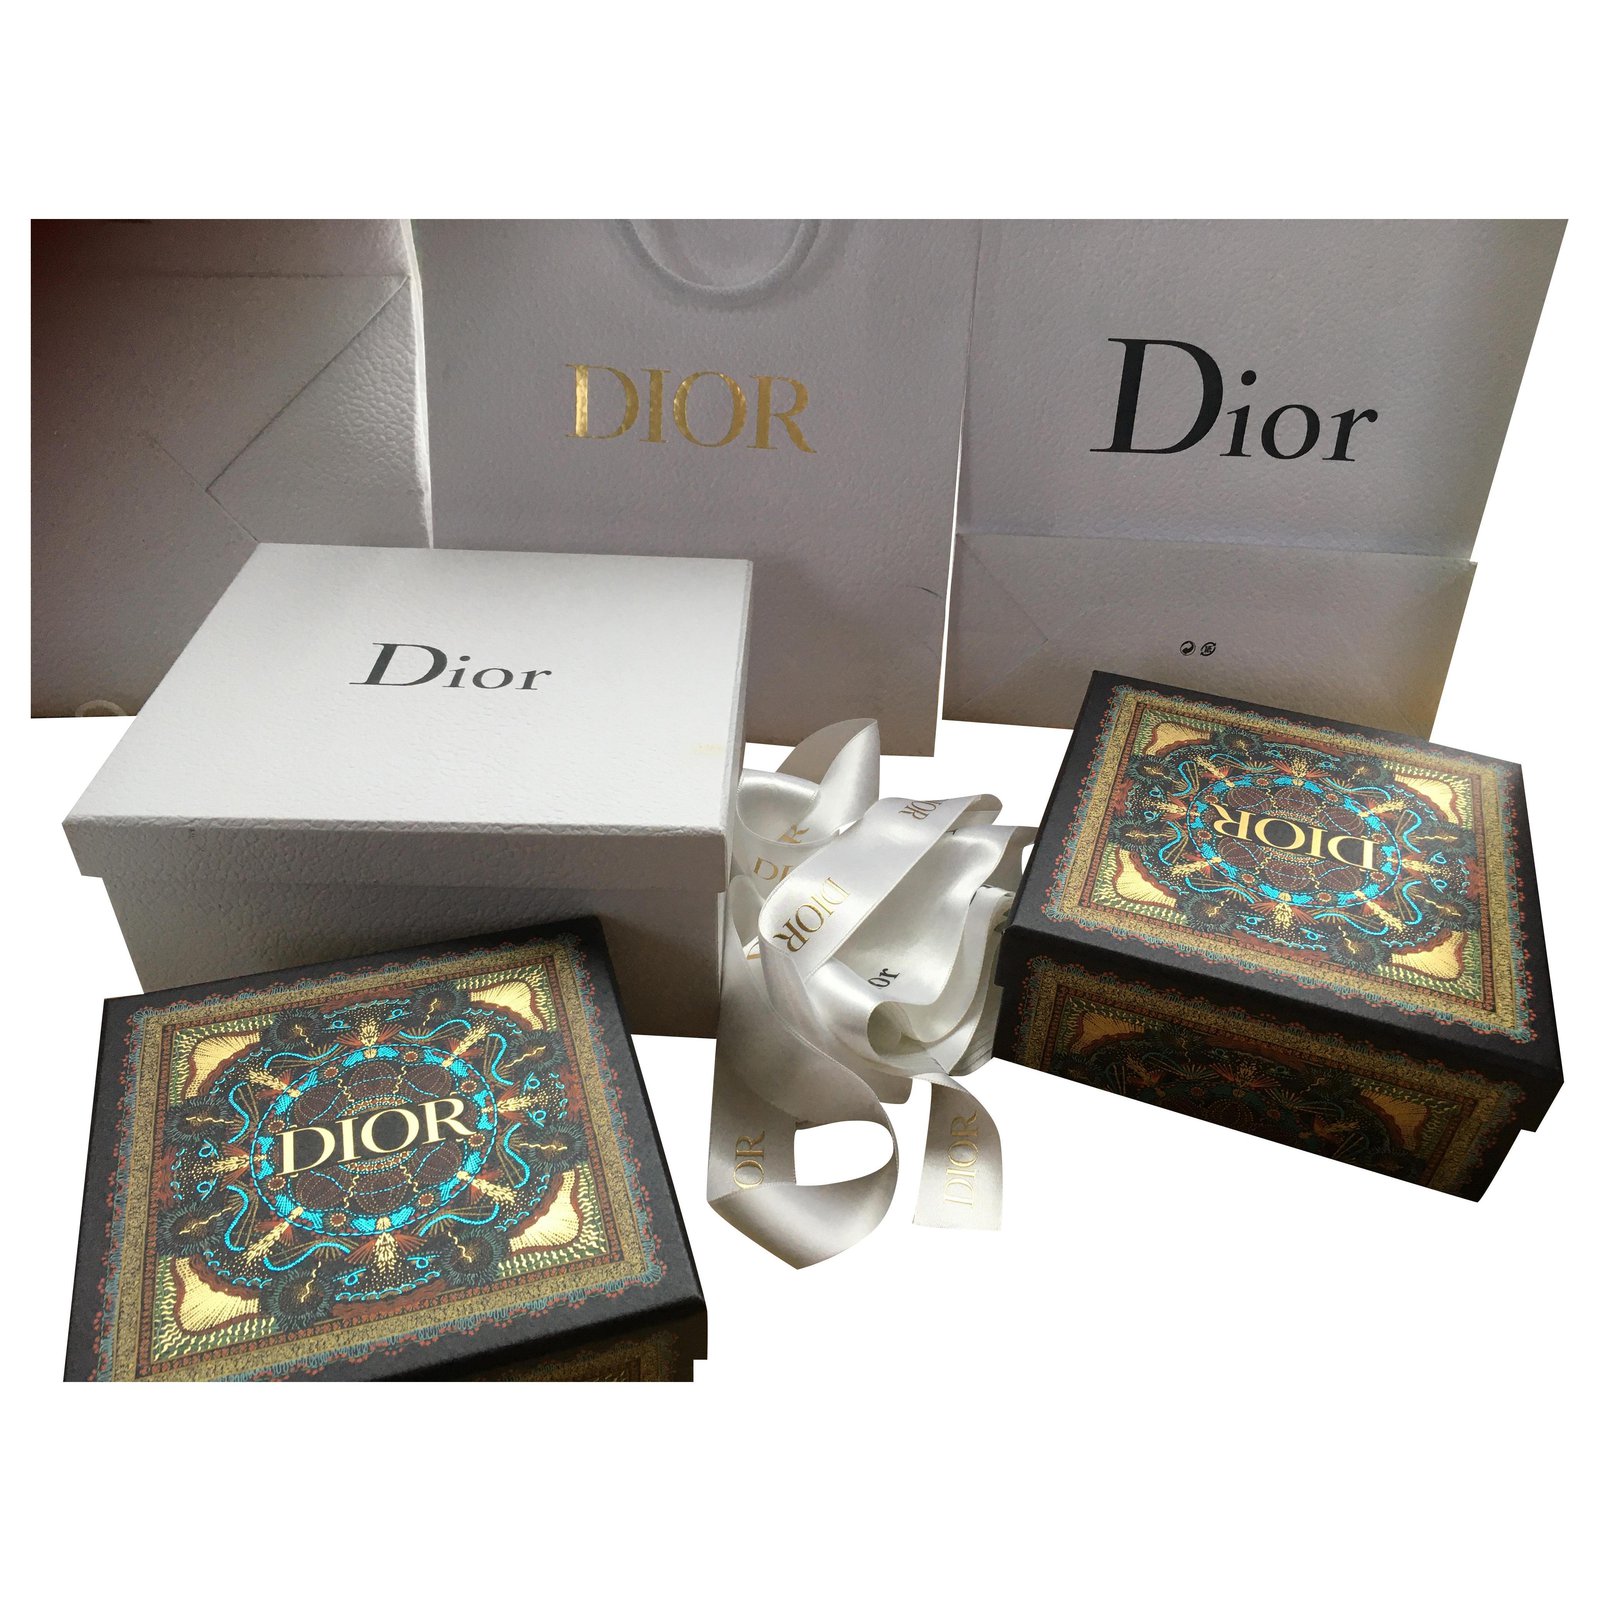 I am selling a range of very good condition Dior packaging bags